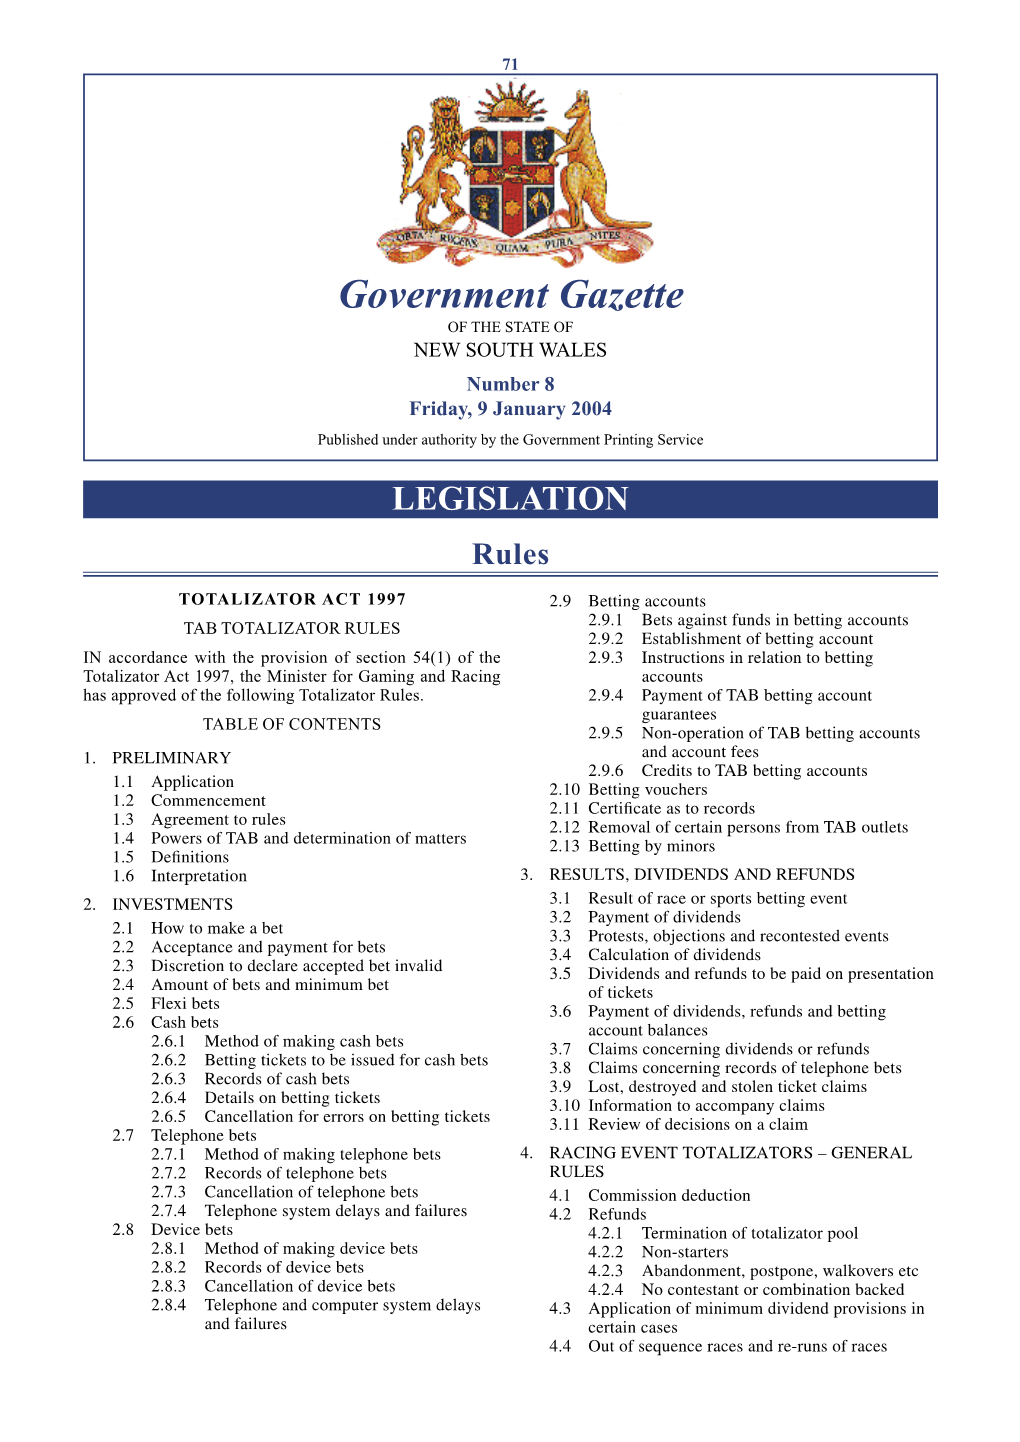 Government Gazette of the STATE of NEW SOUTH WALES Number 8 Friday, 9 January 2004 Published Under Authority by the Government Printing Service